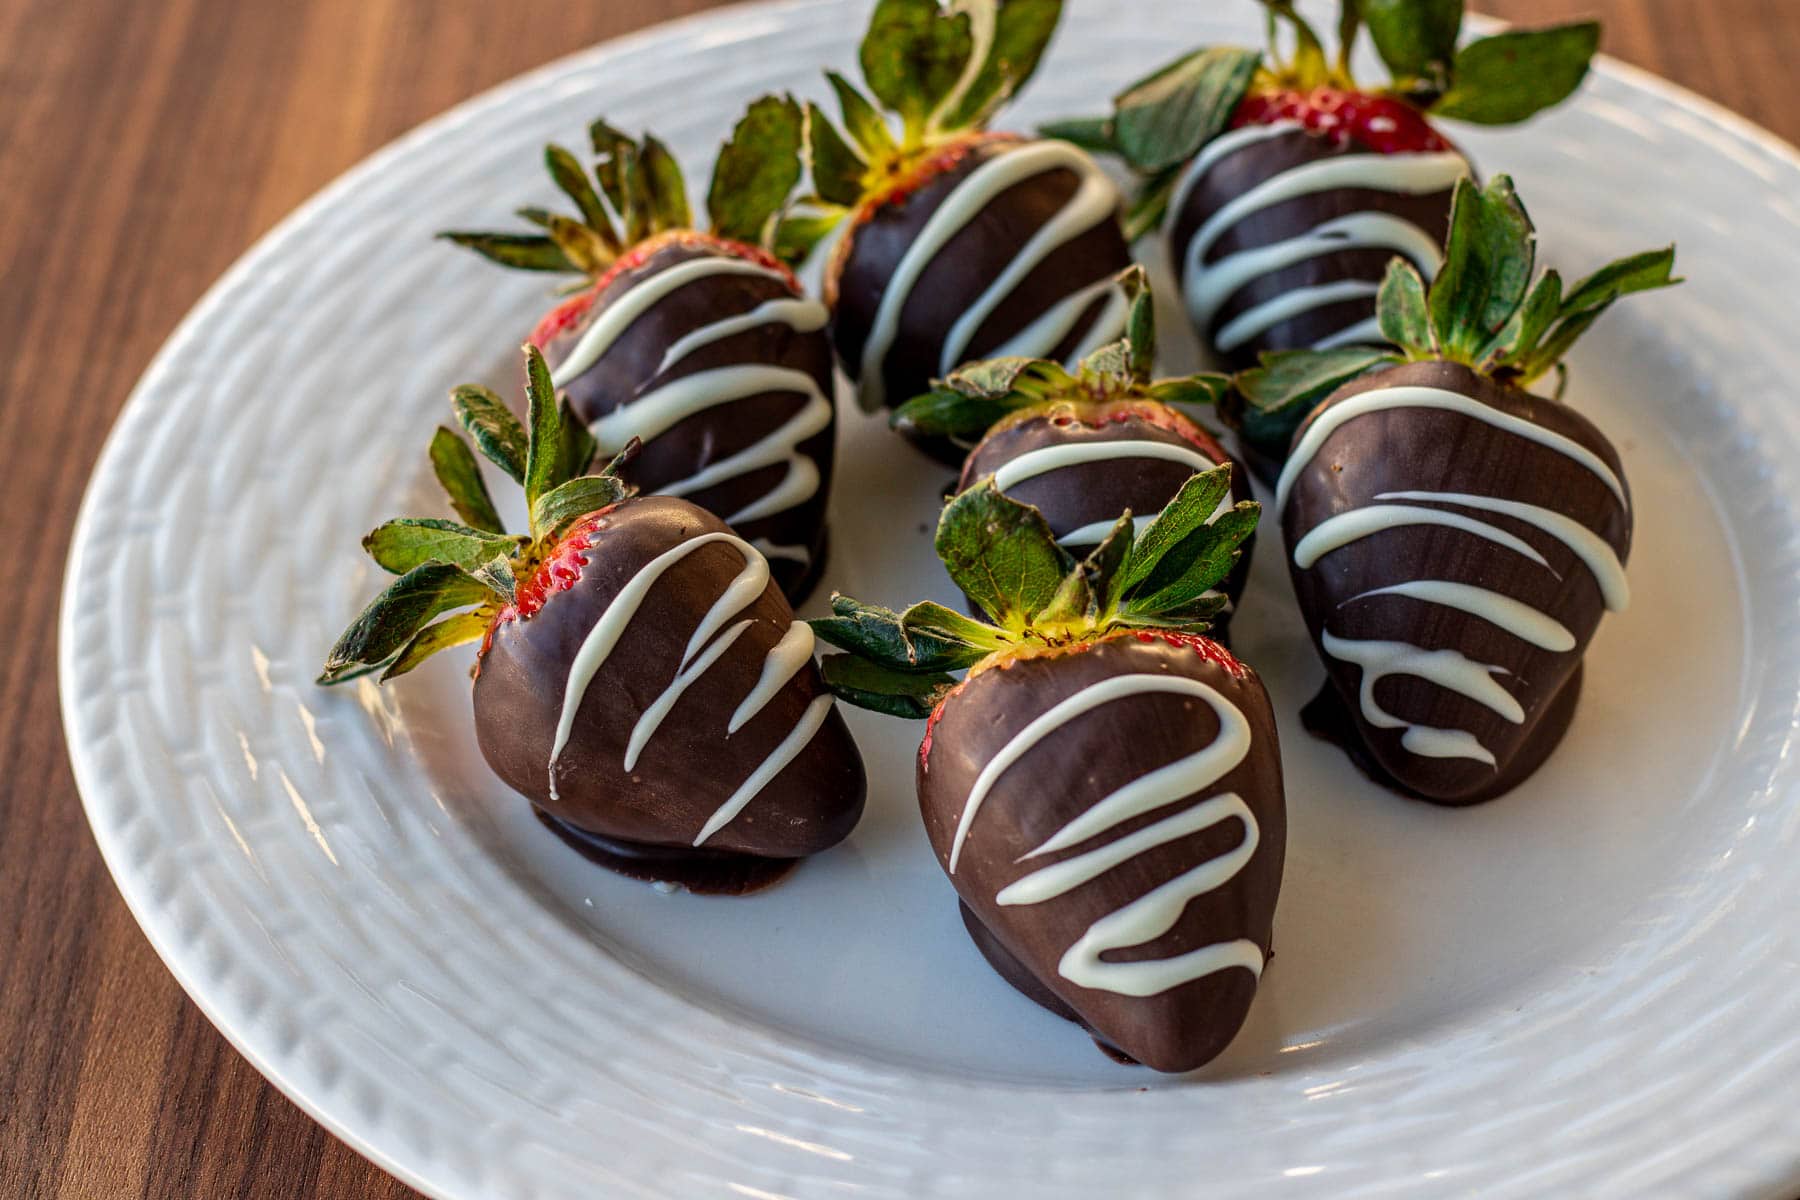 landscape photo of chocolate covered strawberries on a plate